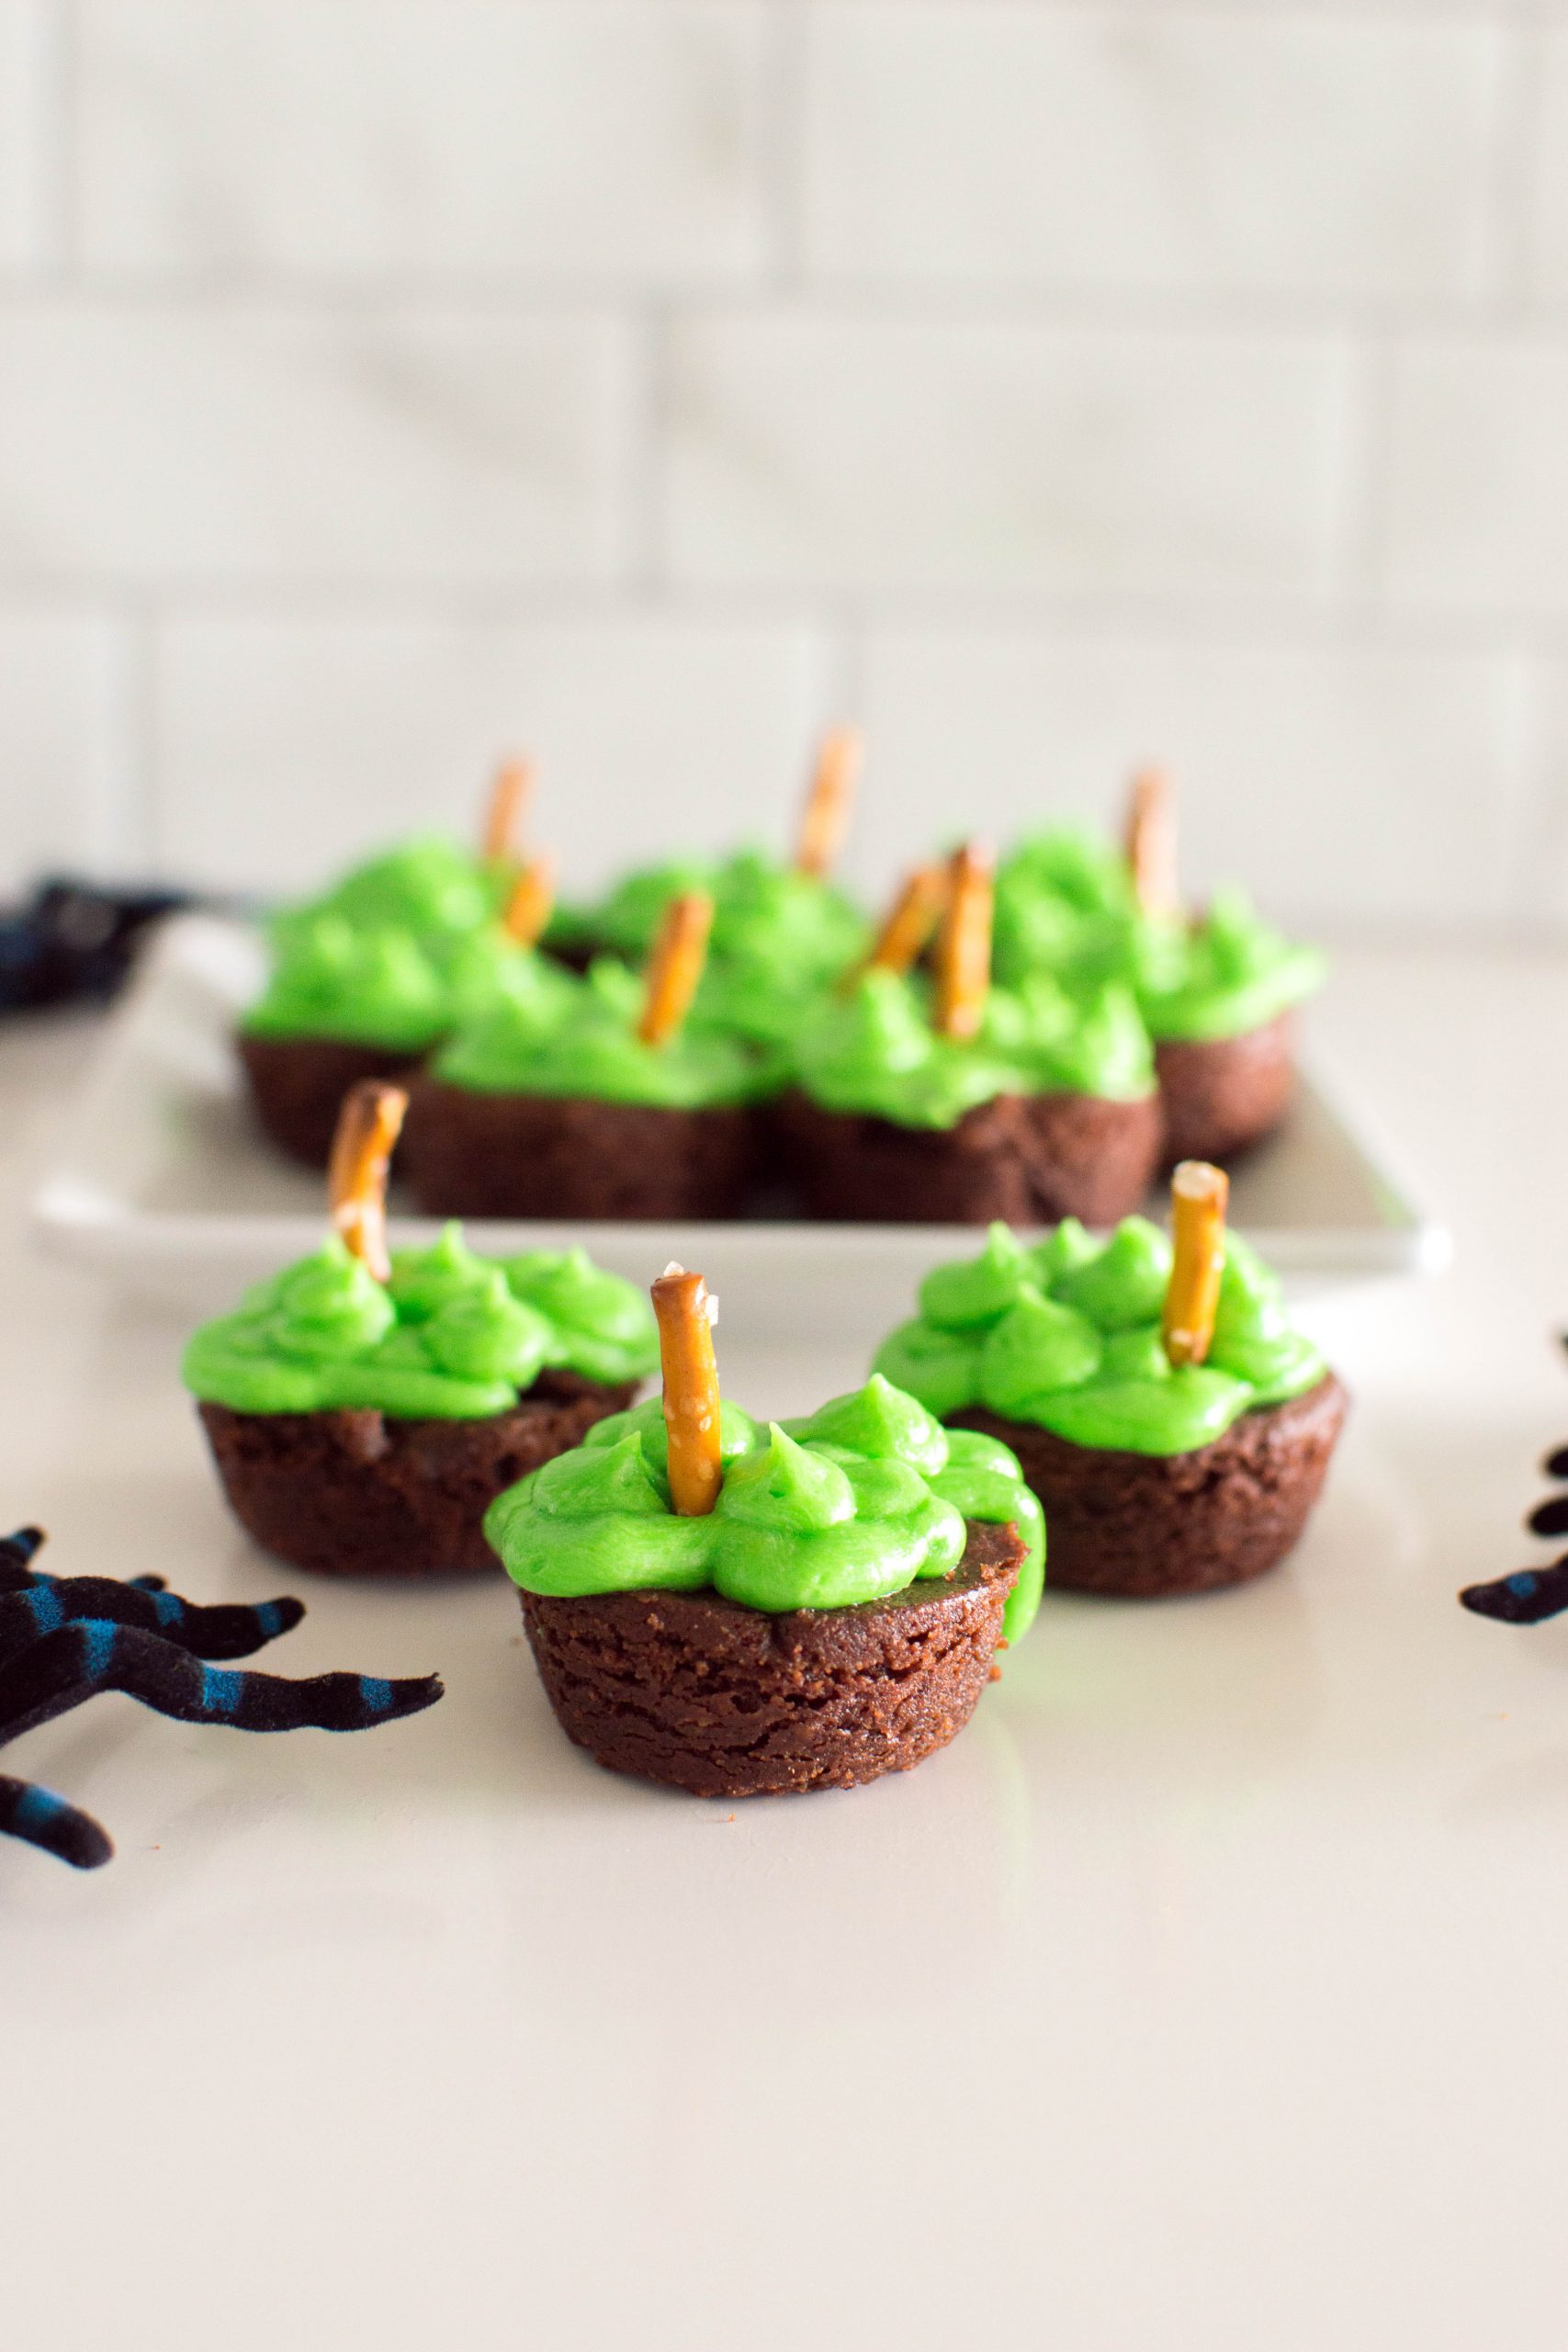 These Halloween brownies are no trick! When it comes to throwing spooky celebrations, these witch cauldron brownies are an excellent addition to your Halloween sweet table. The best part? They only take minutes to whip-up!